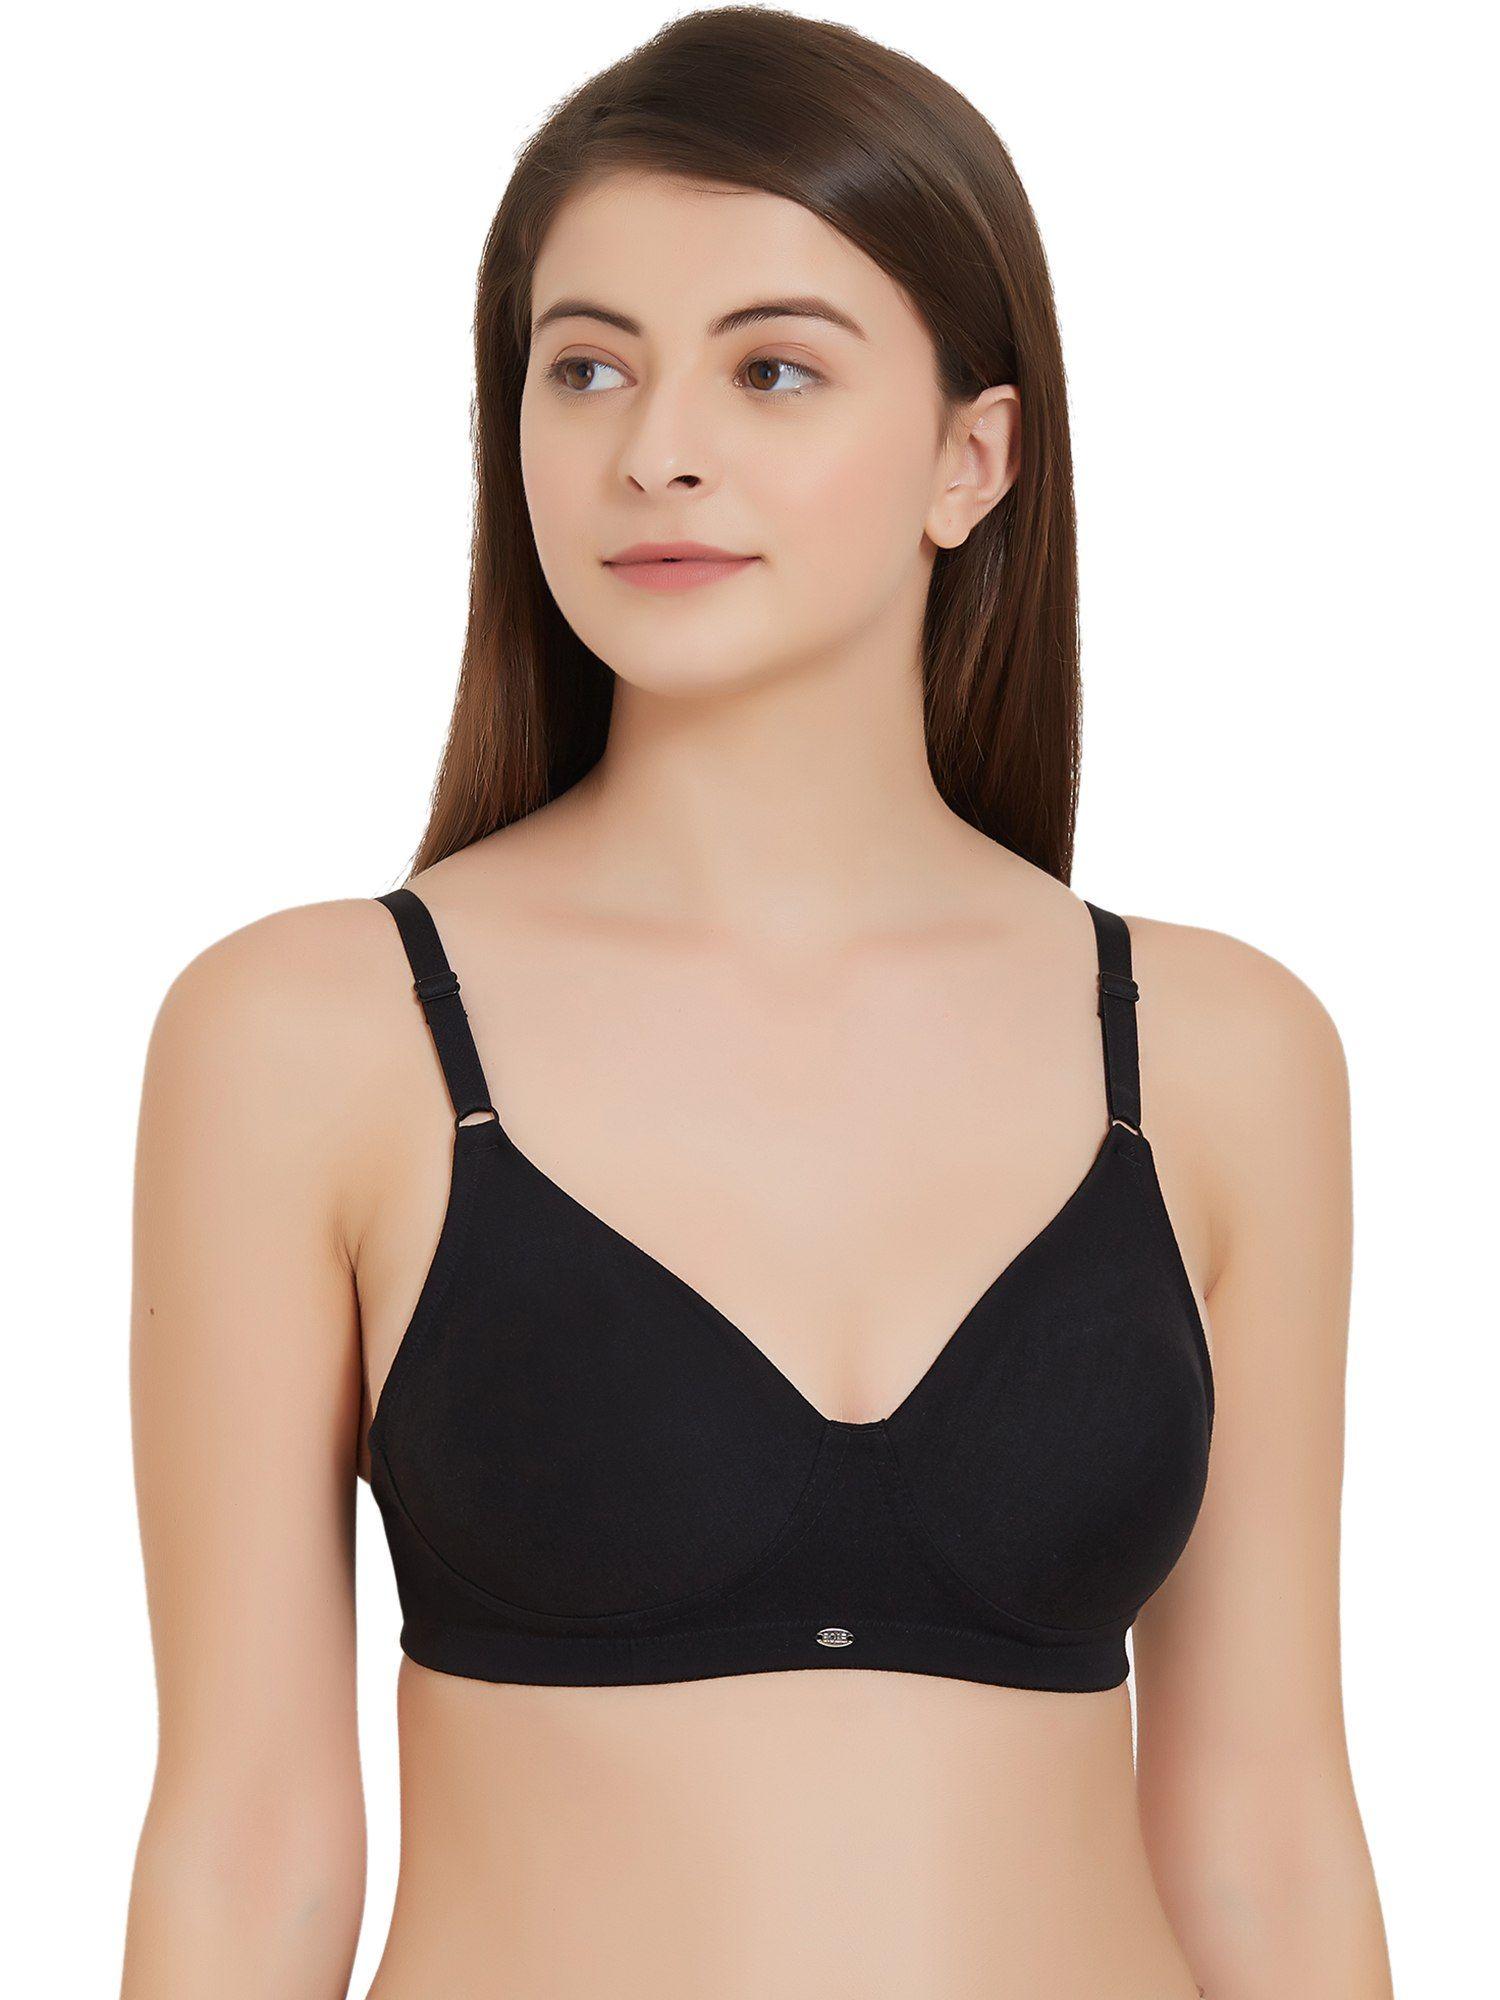 women's full coverage seamless cup non-wired bra -black